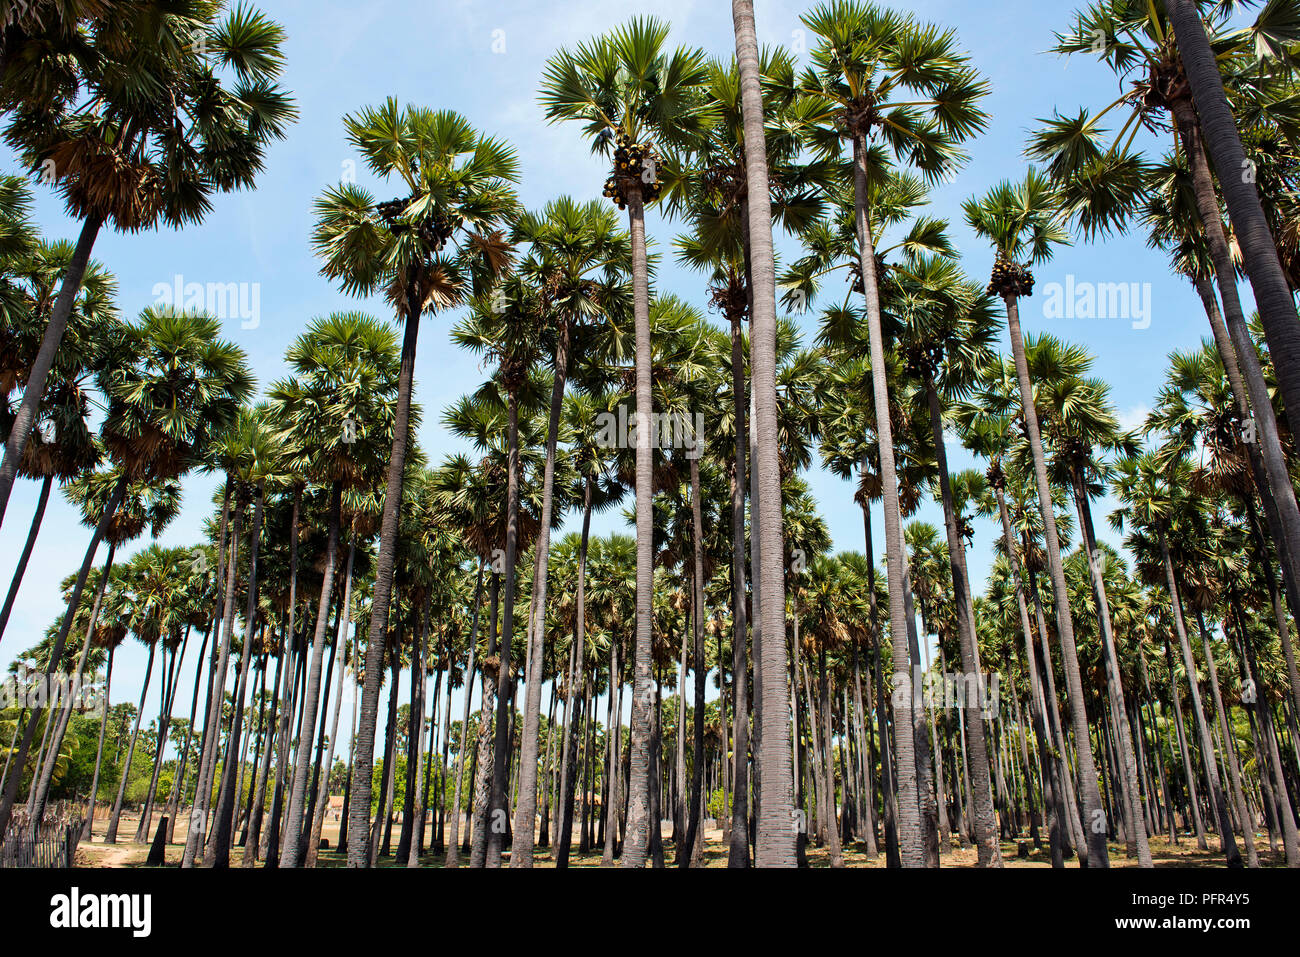 Sri Lanka, North Eastern Province, Jaffna, Kayts, view of palm trees, low angle view Stock Photo